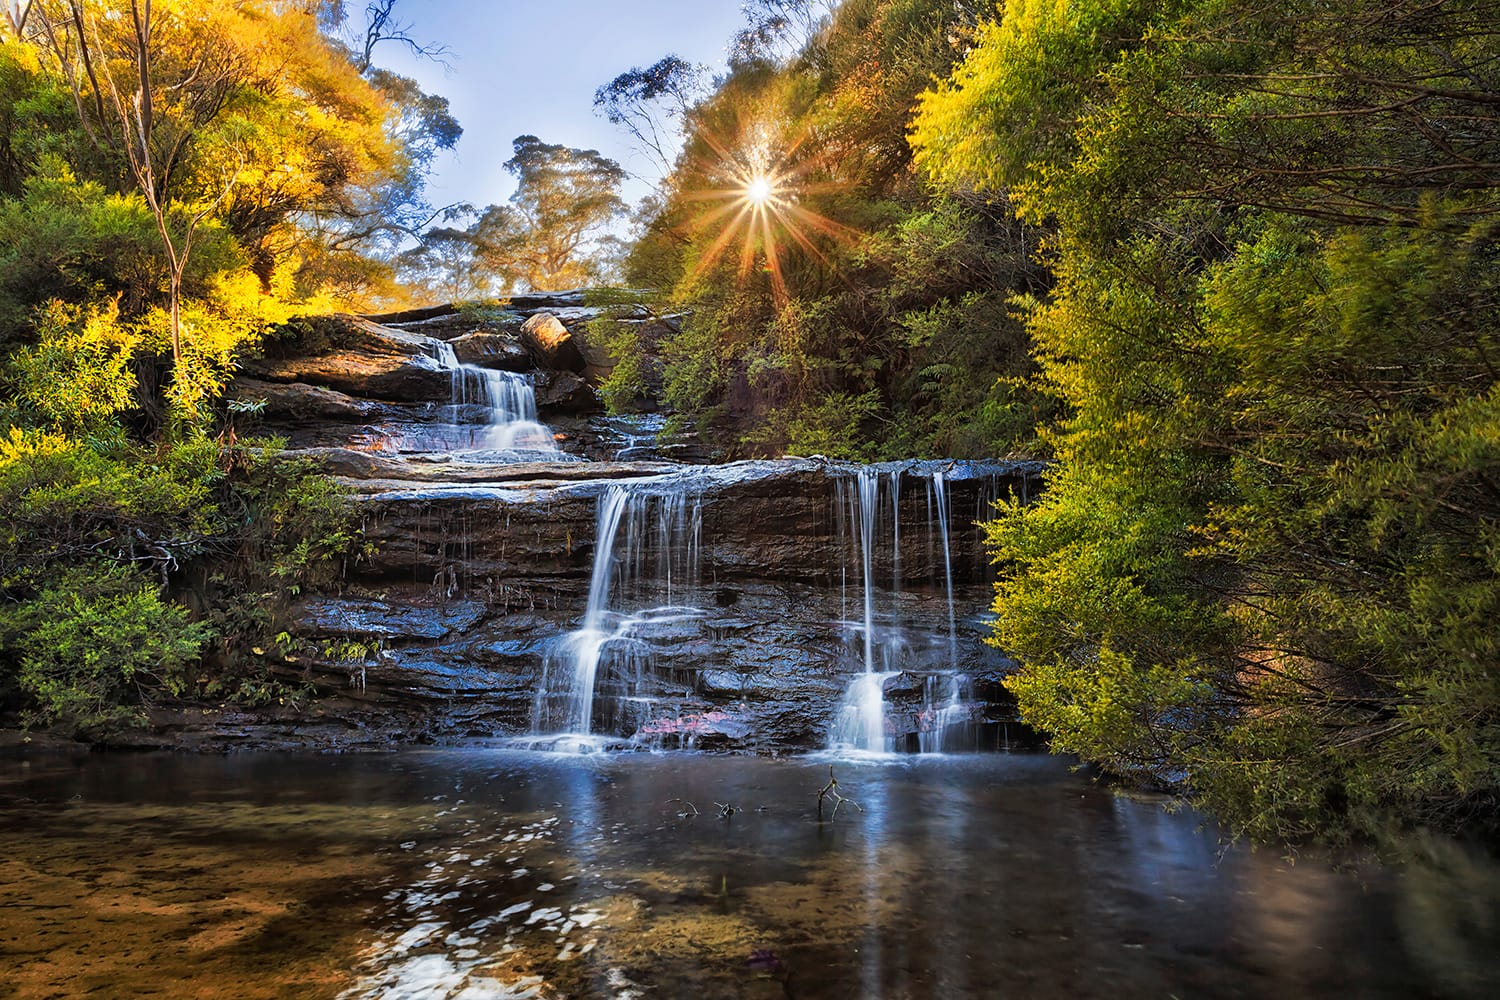 Wentworth falls in Blue Mountains NP, Australia